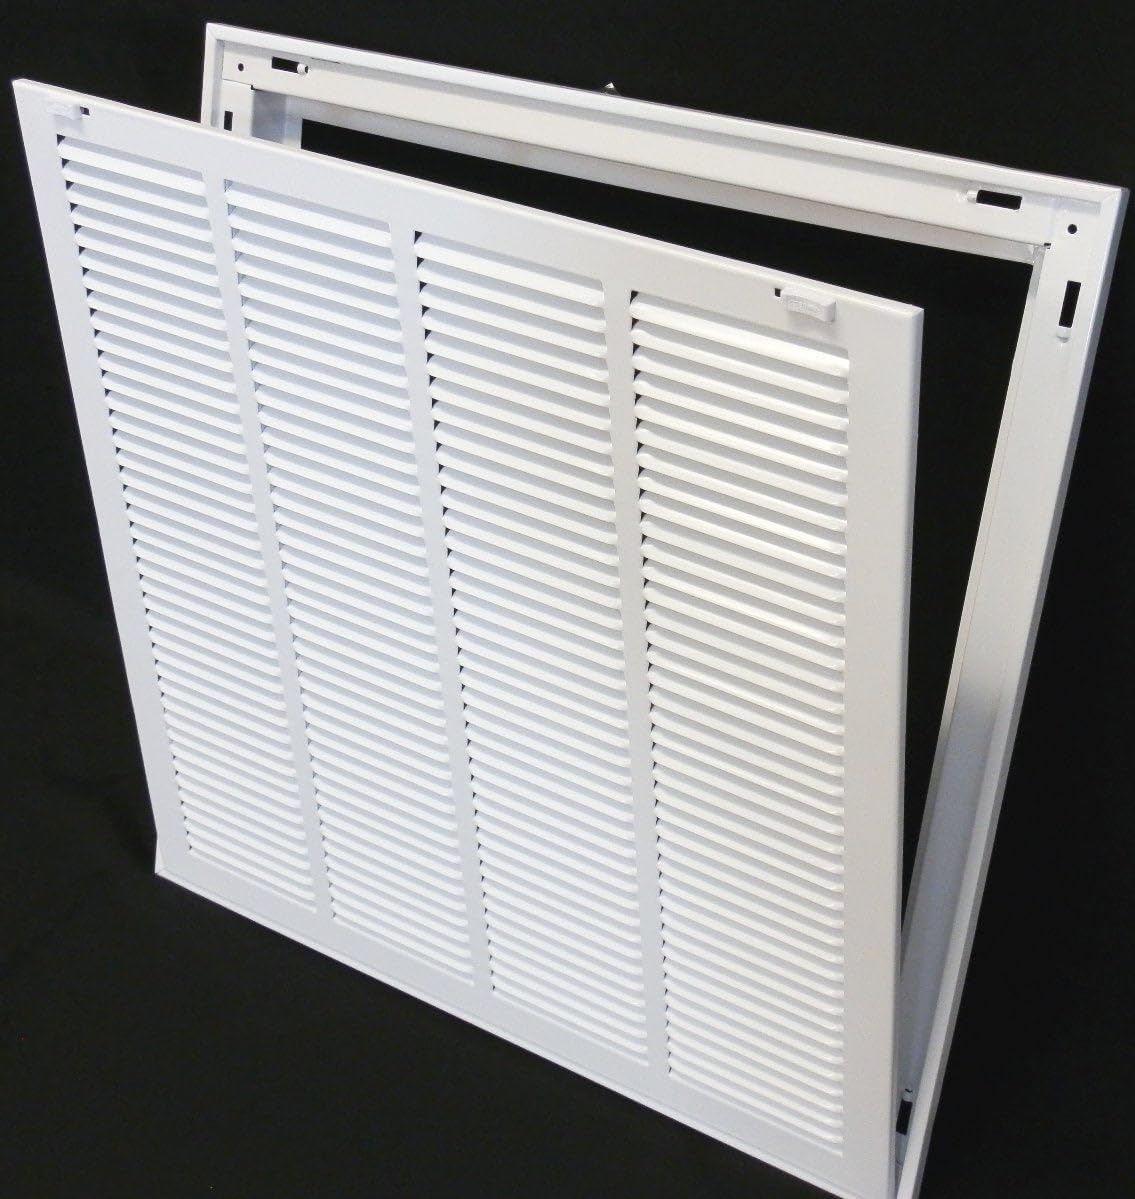 25&quot; X 25&quot; Steel Return Air Filter Grille for 1&quot; Filter - Removable Frame - *Filter Included* [Outer Dimensions: 26 5/8&quot; X 26 5/8&quot;]